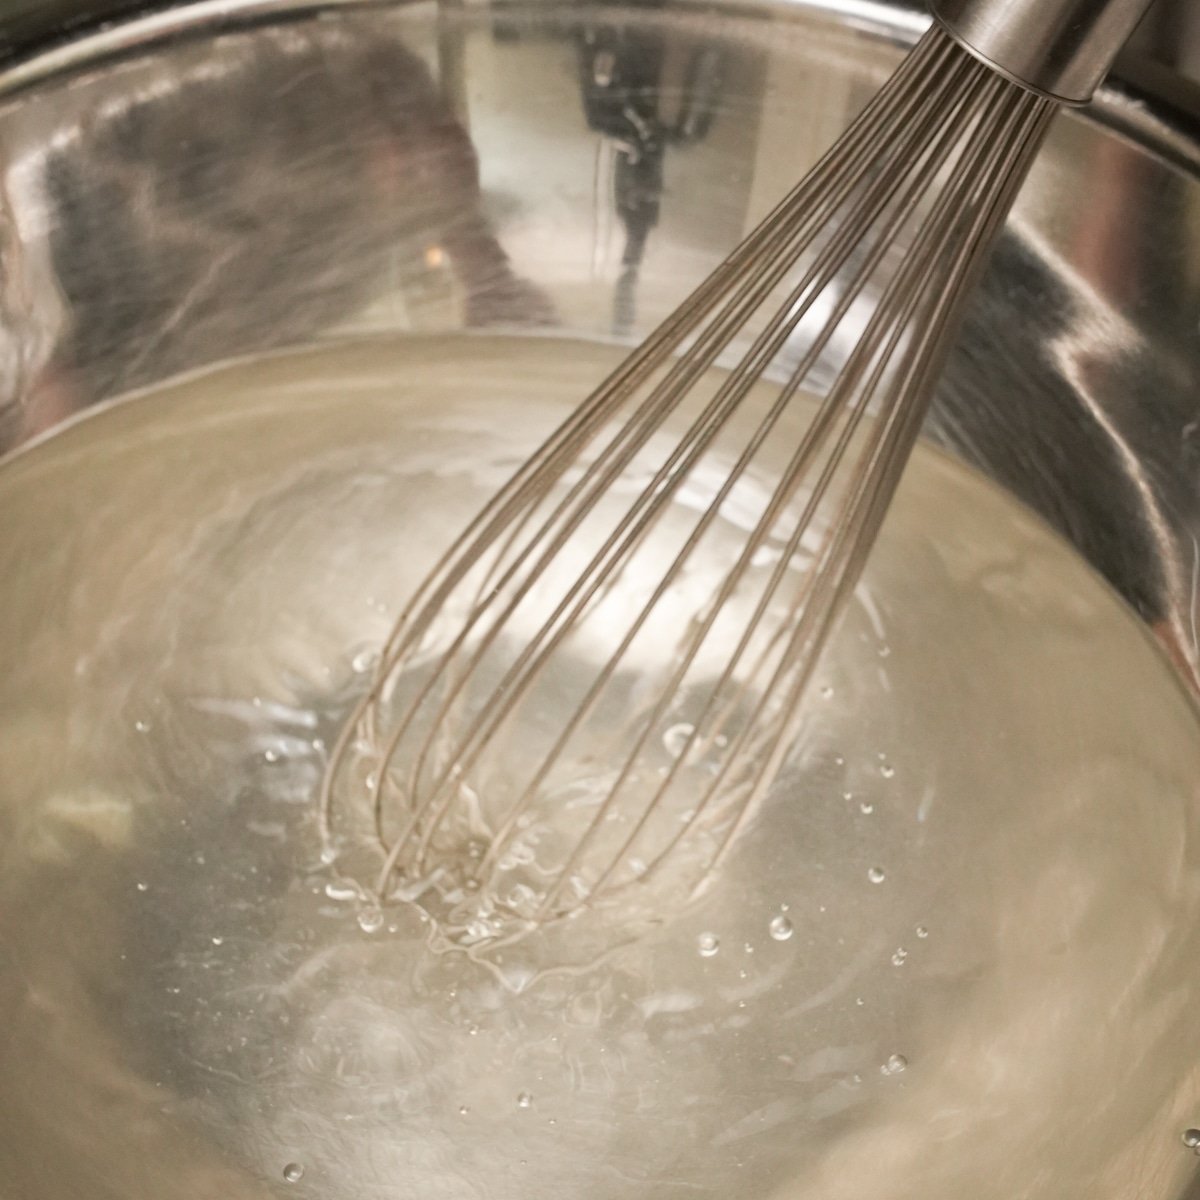 A whisk mixing together a brining solution of water, salt, and sugar for brining chicken tenders.